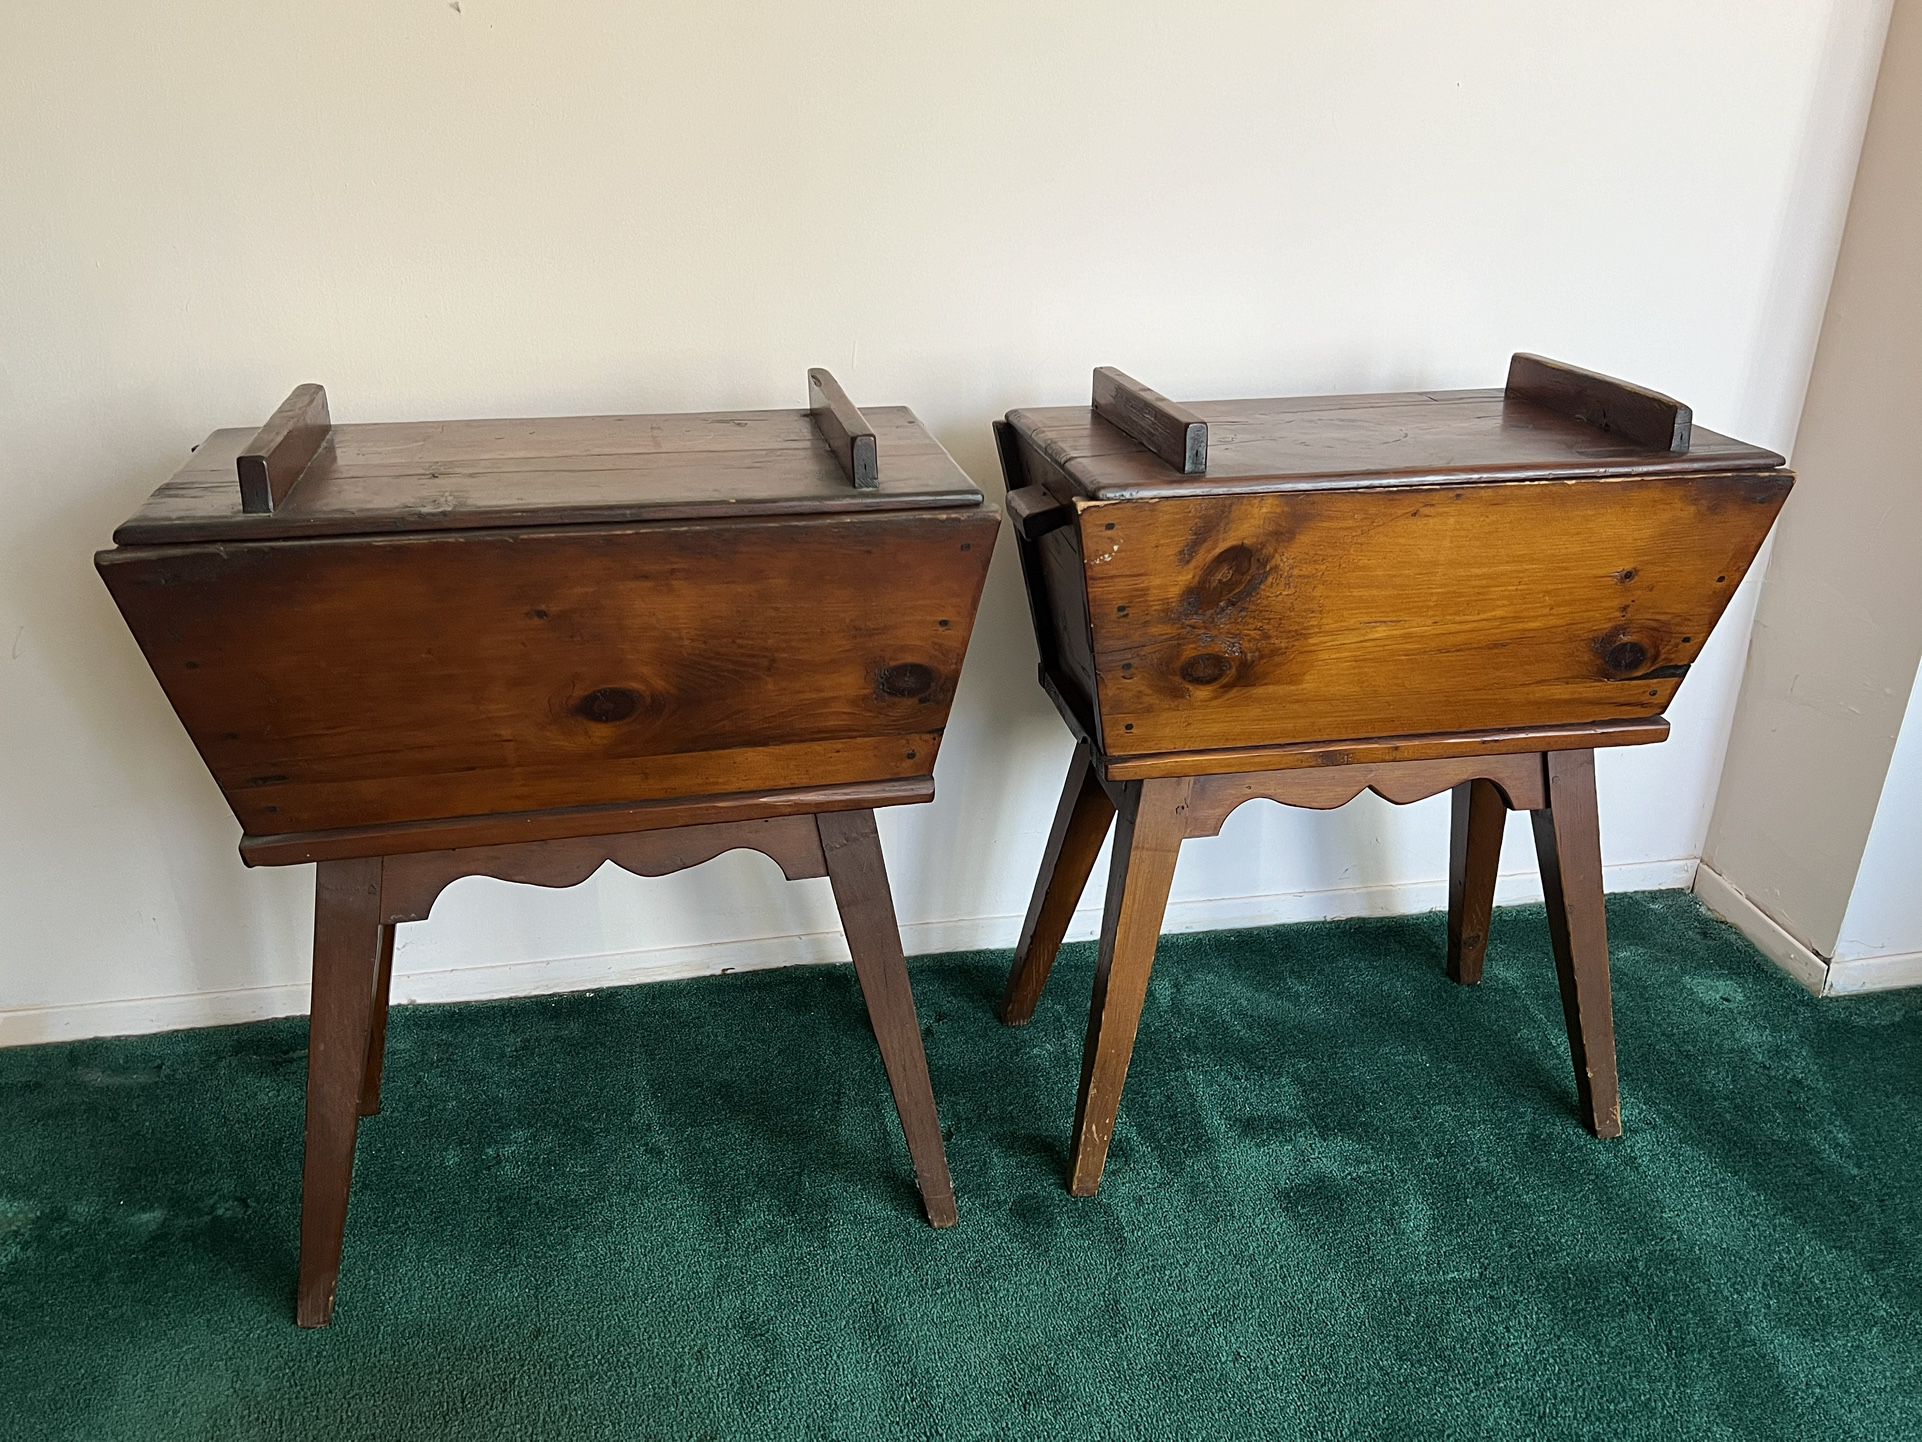 PRICE DROP!! Amazing Antique Dough Box Side Tables - 2 Available